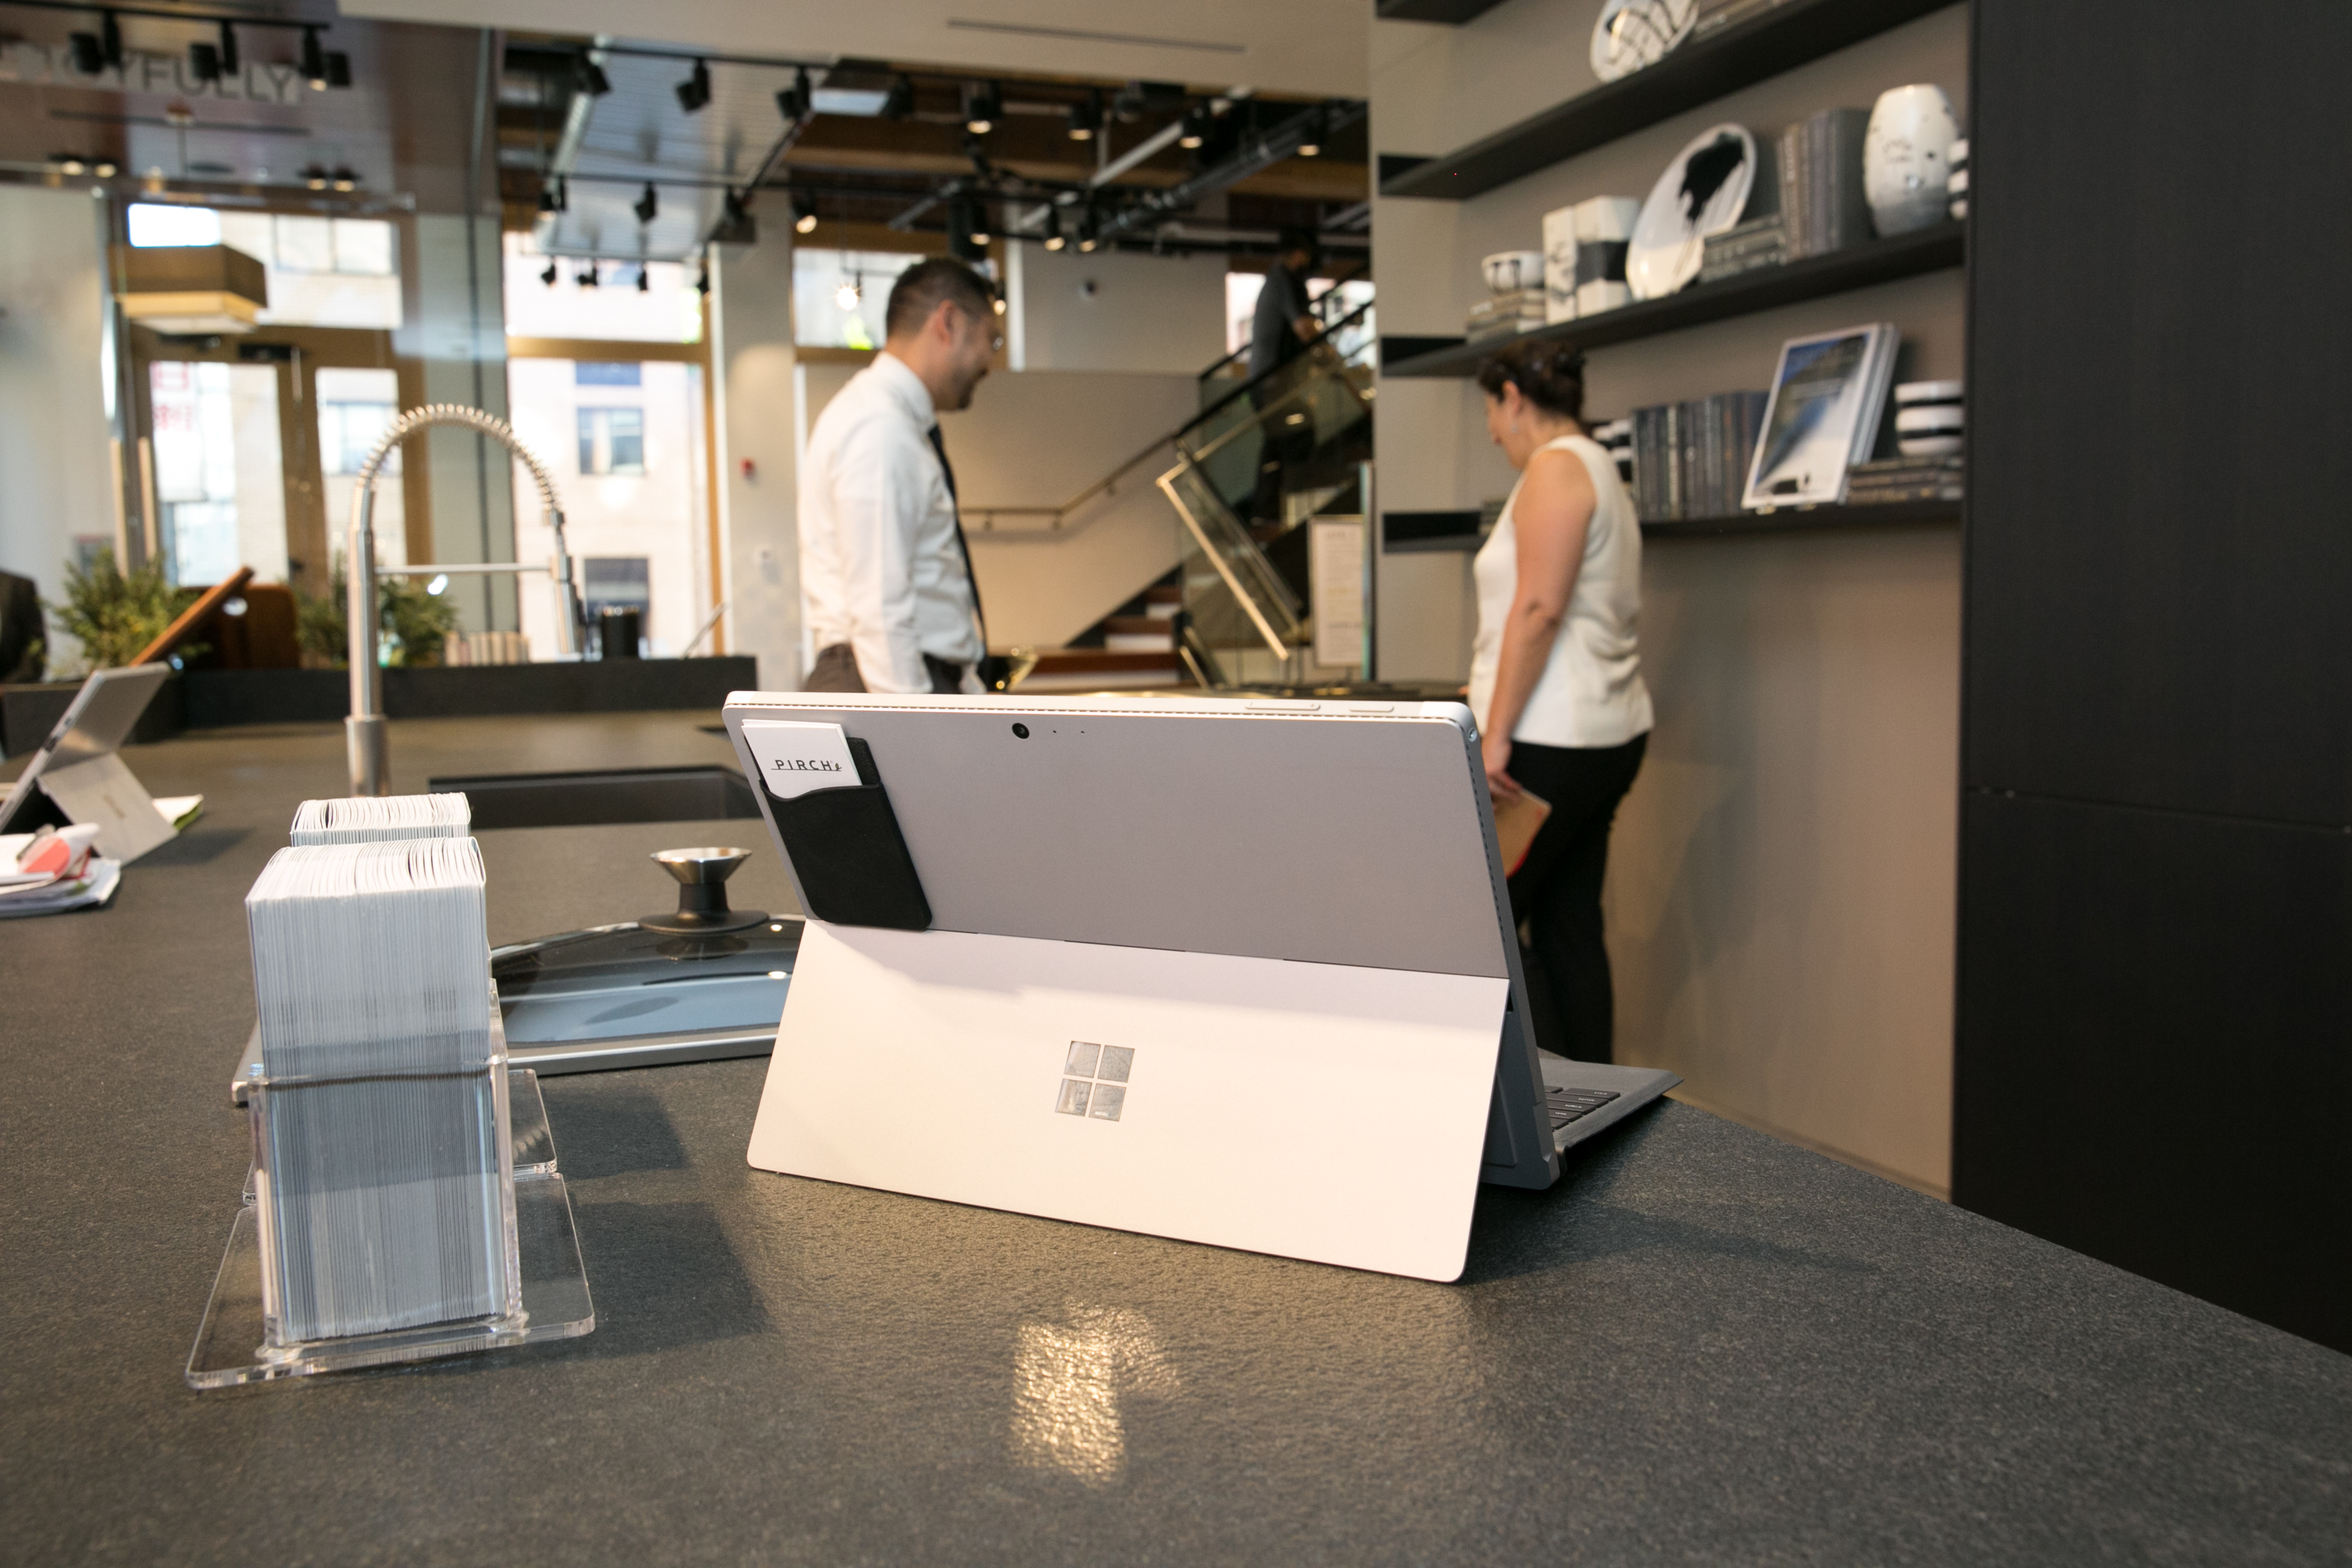 Luxury retailer Pirch taps Surface to enhance customer experience, drive business